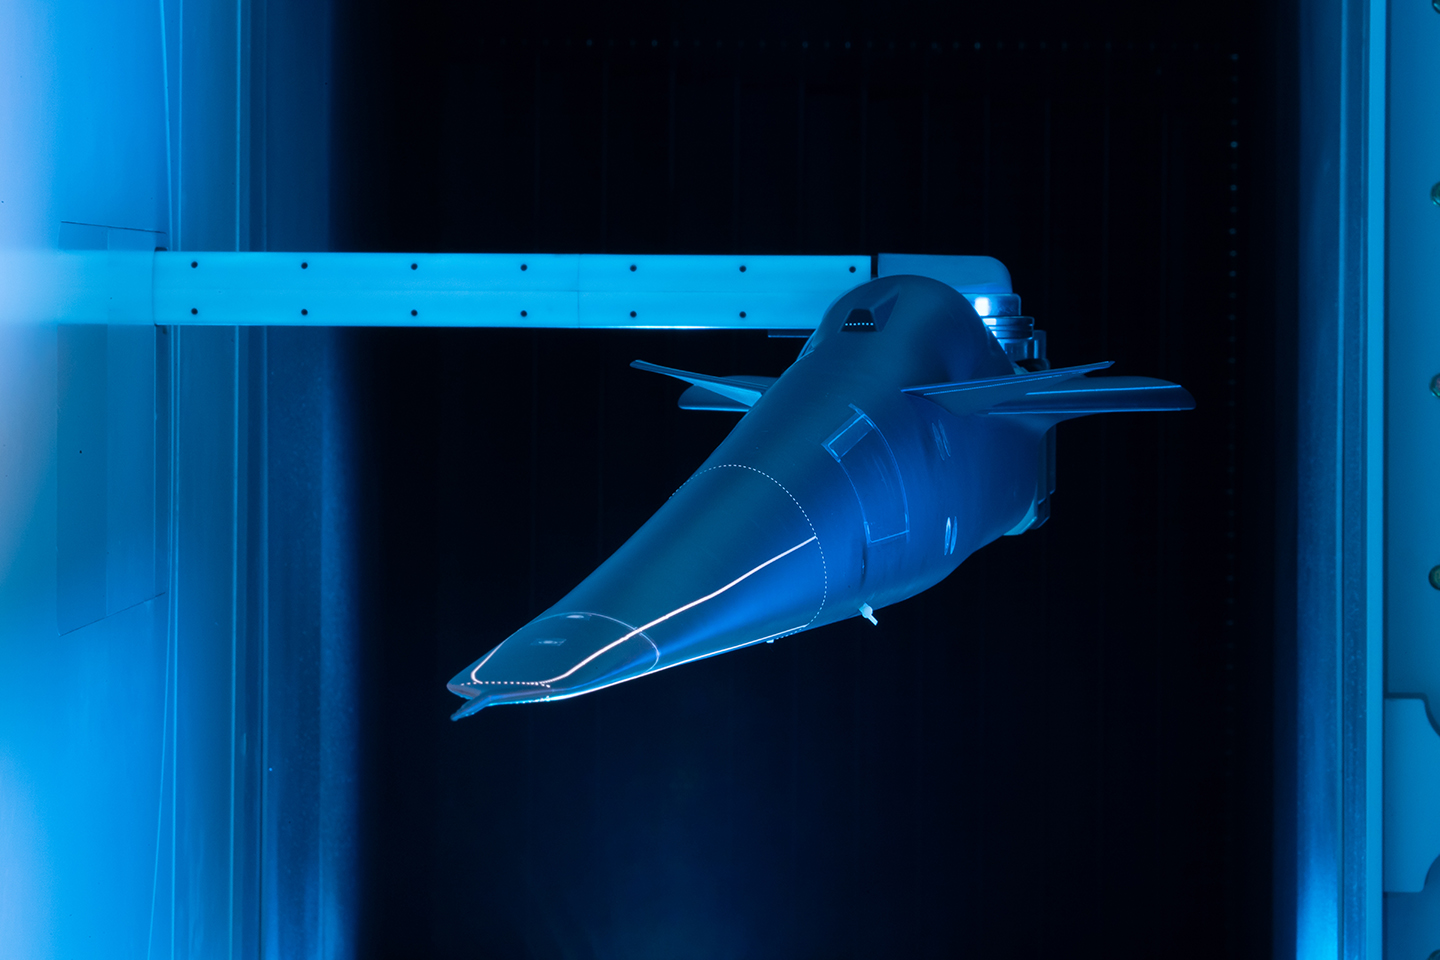 Model of the X-59 in a wind tunnel with blue lighting.